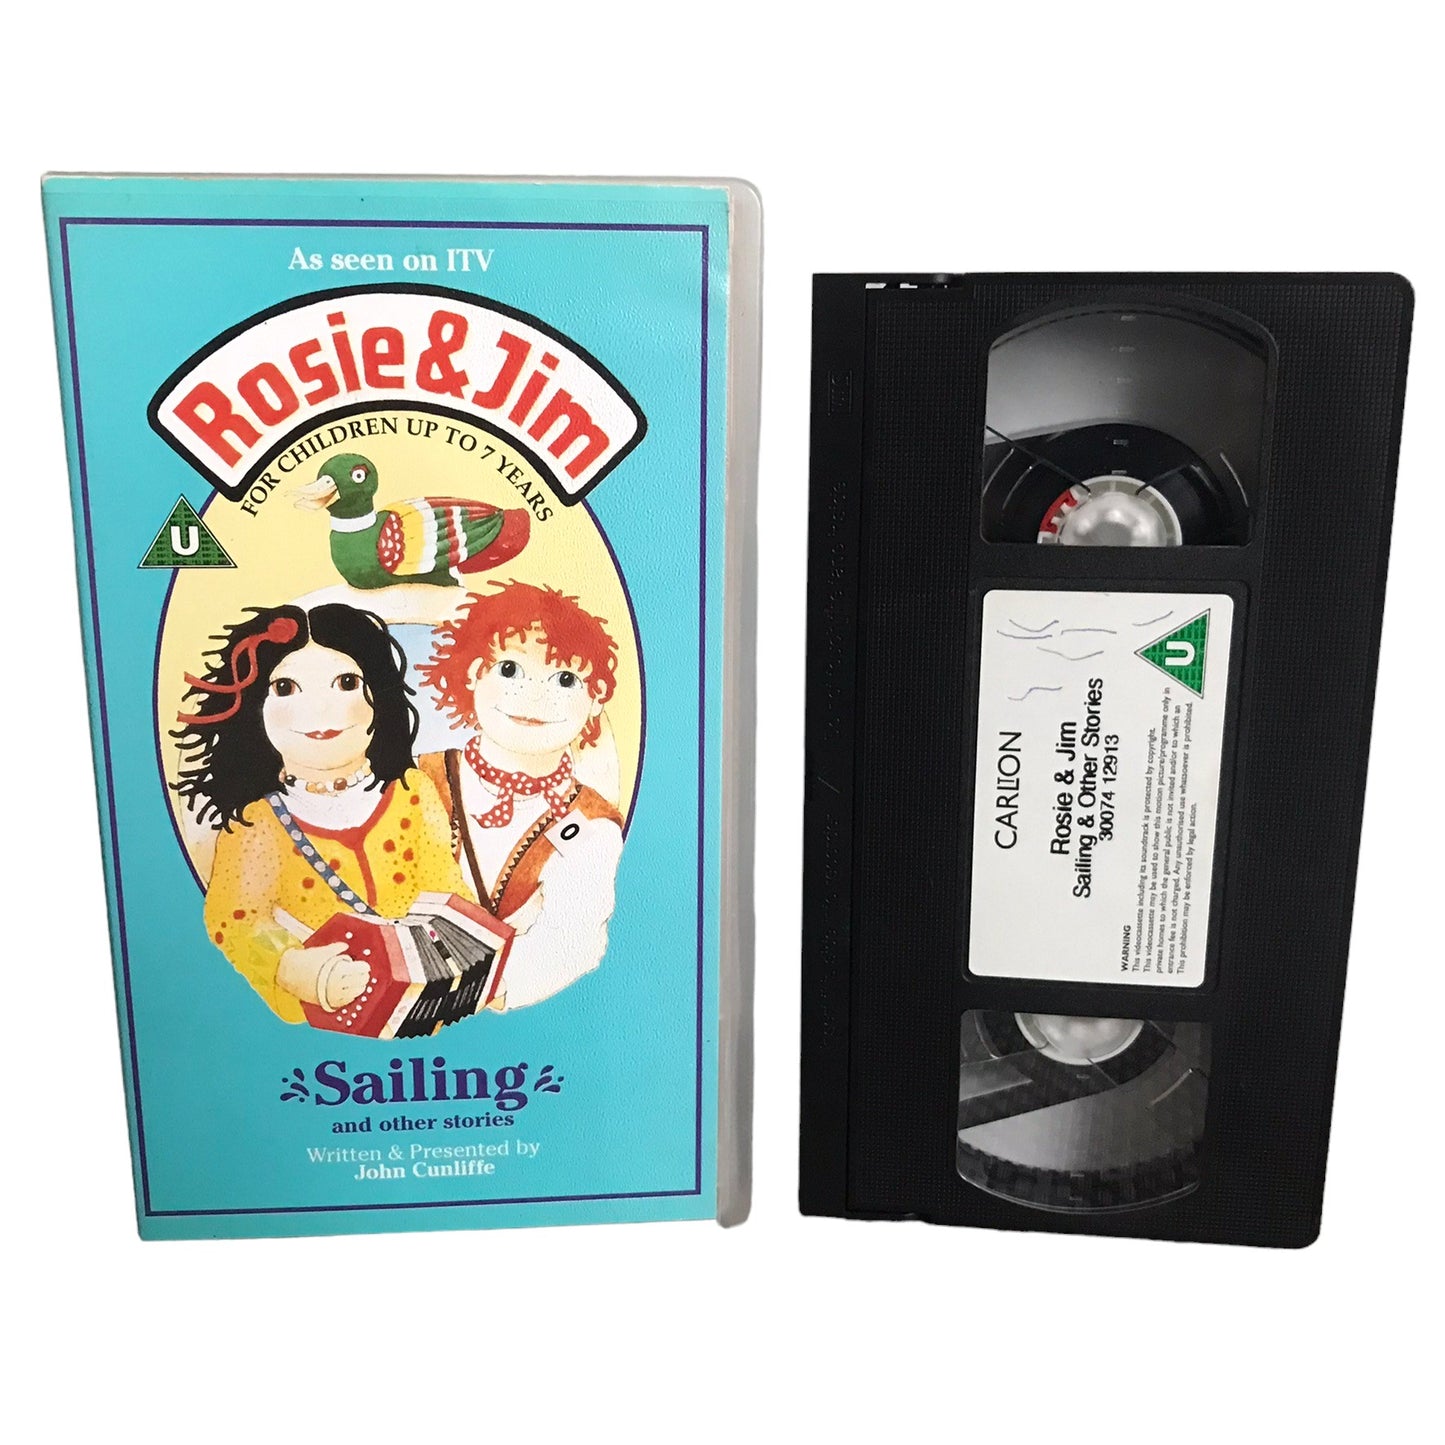 Rosie & Jim Sailing and Other Stories - Robin Stevens - Carlton - Childrens - Pal - VHS-